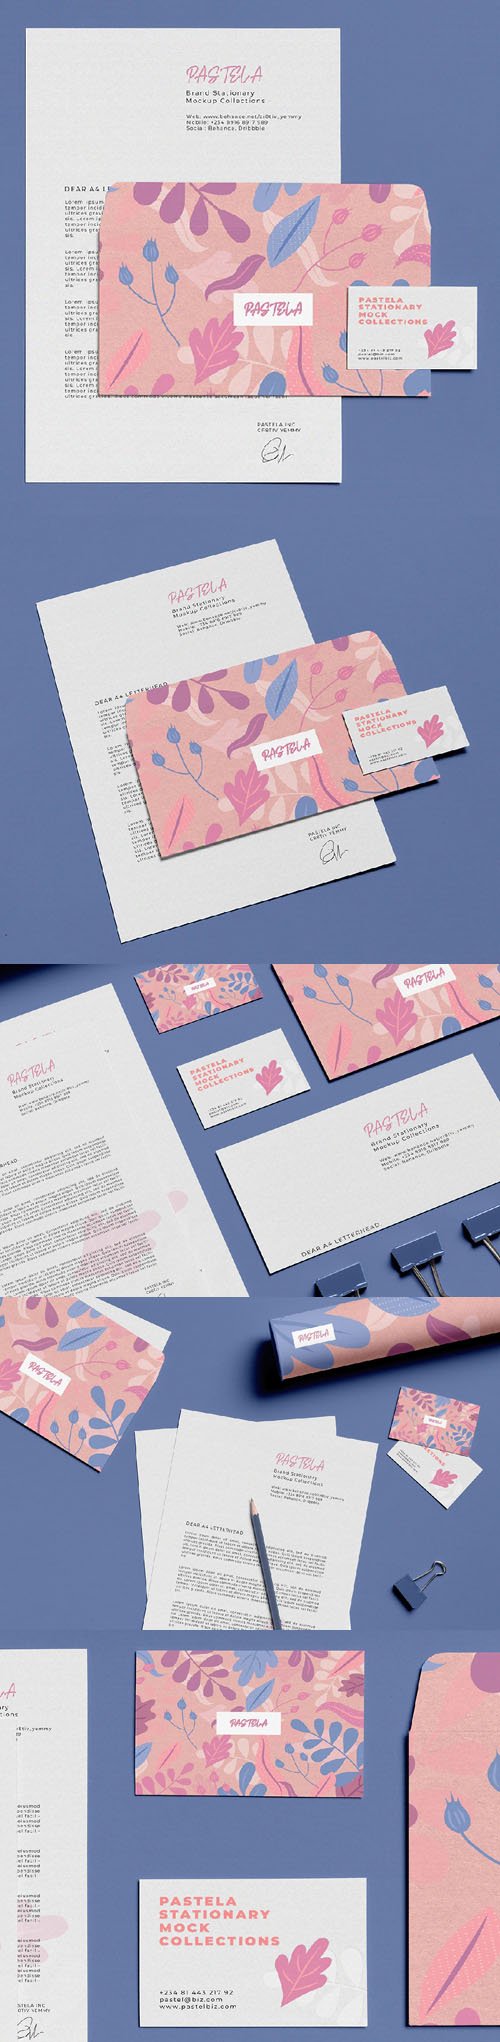 Stationery PSD Mockups Collection